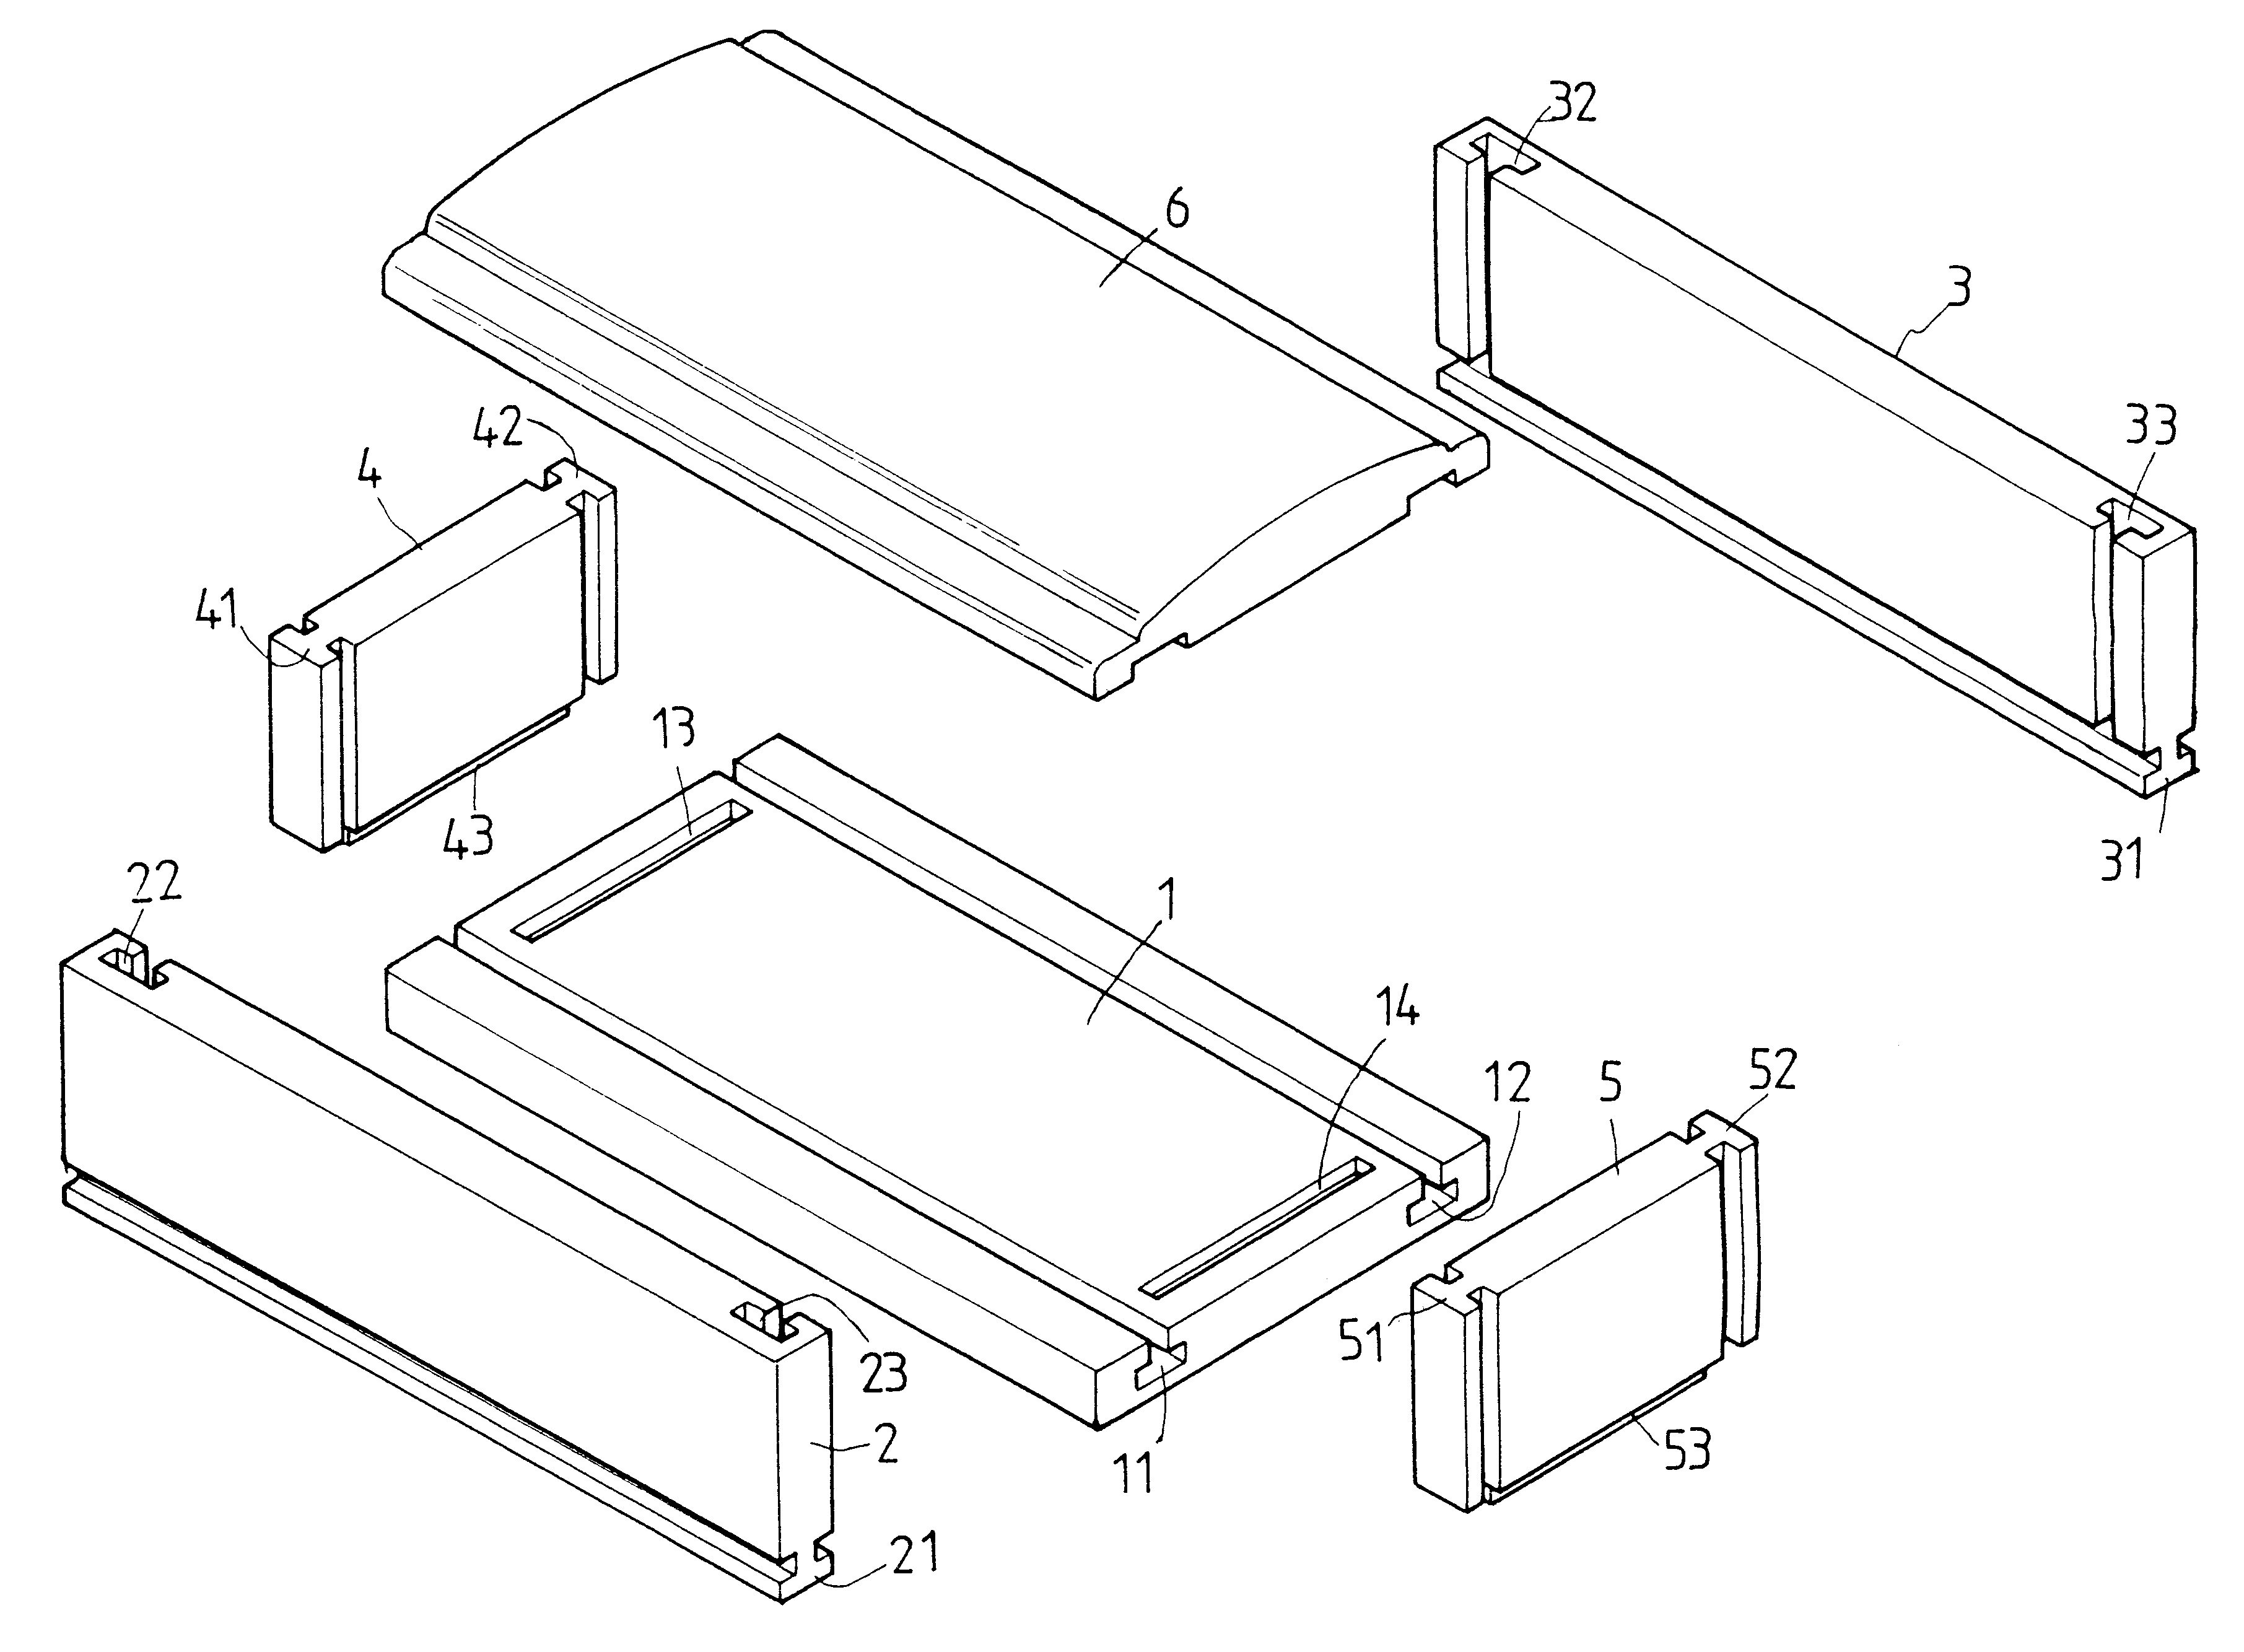 Structure of a coffin